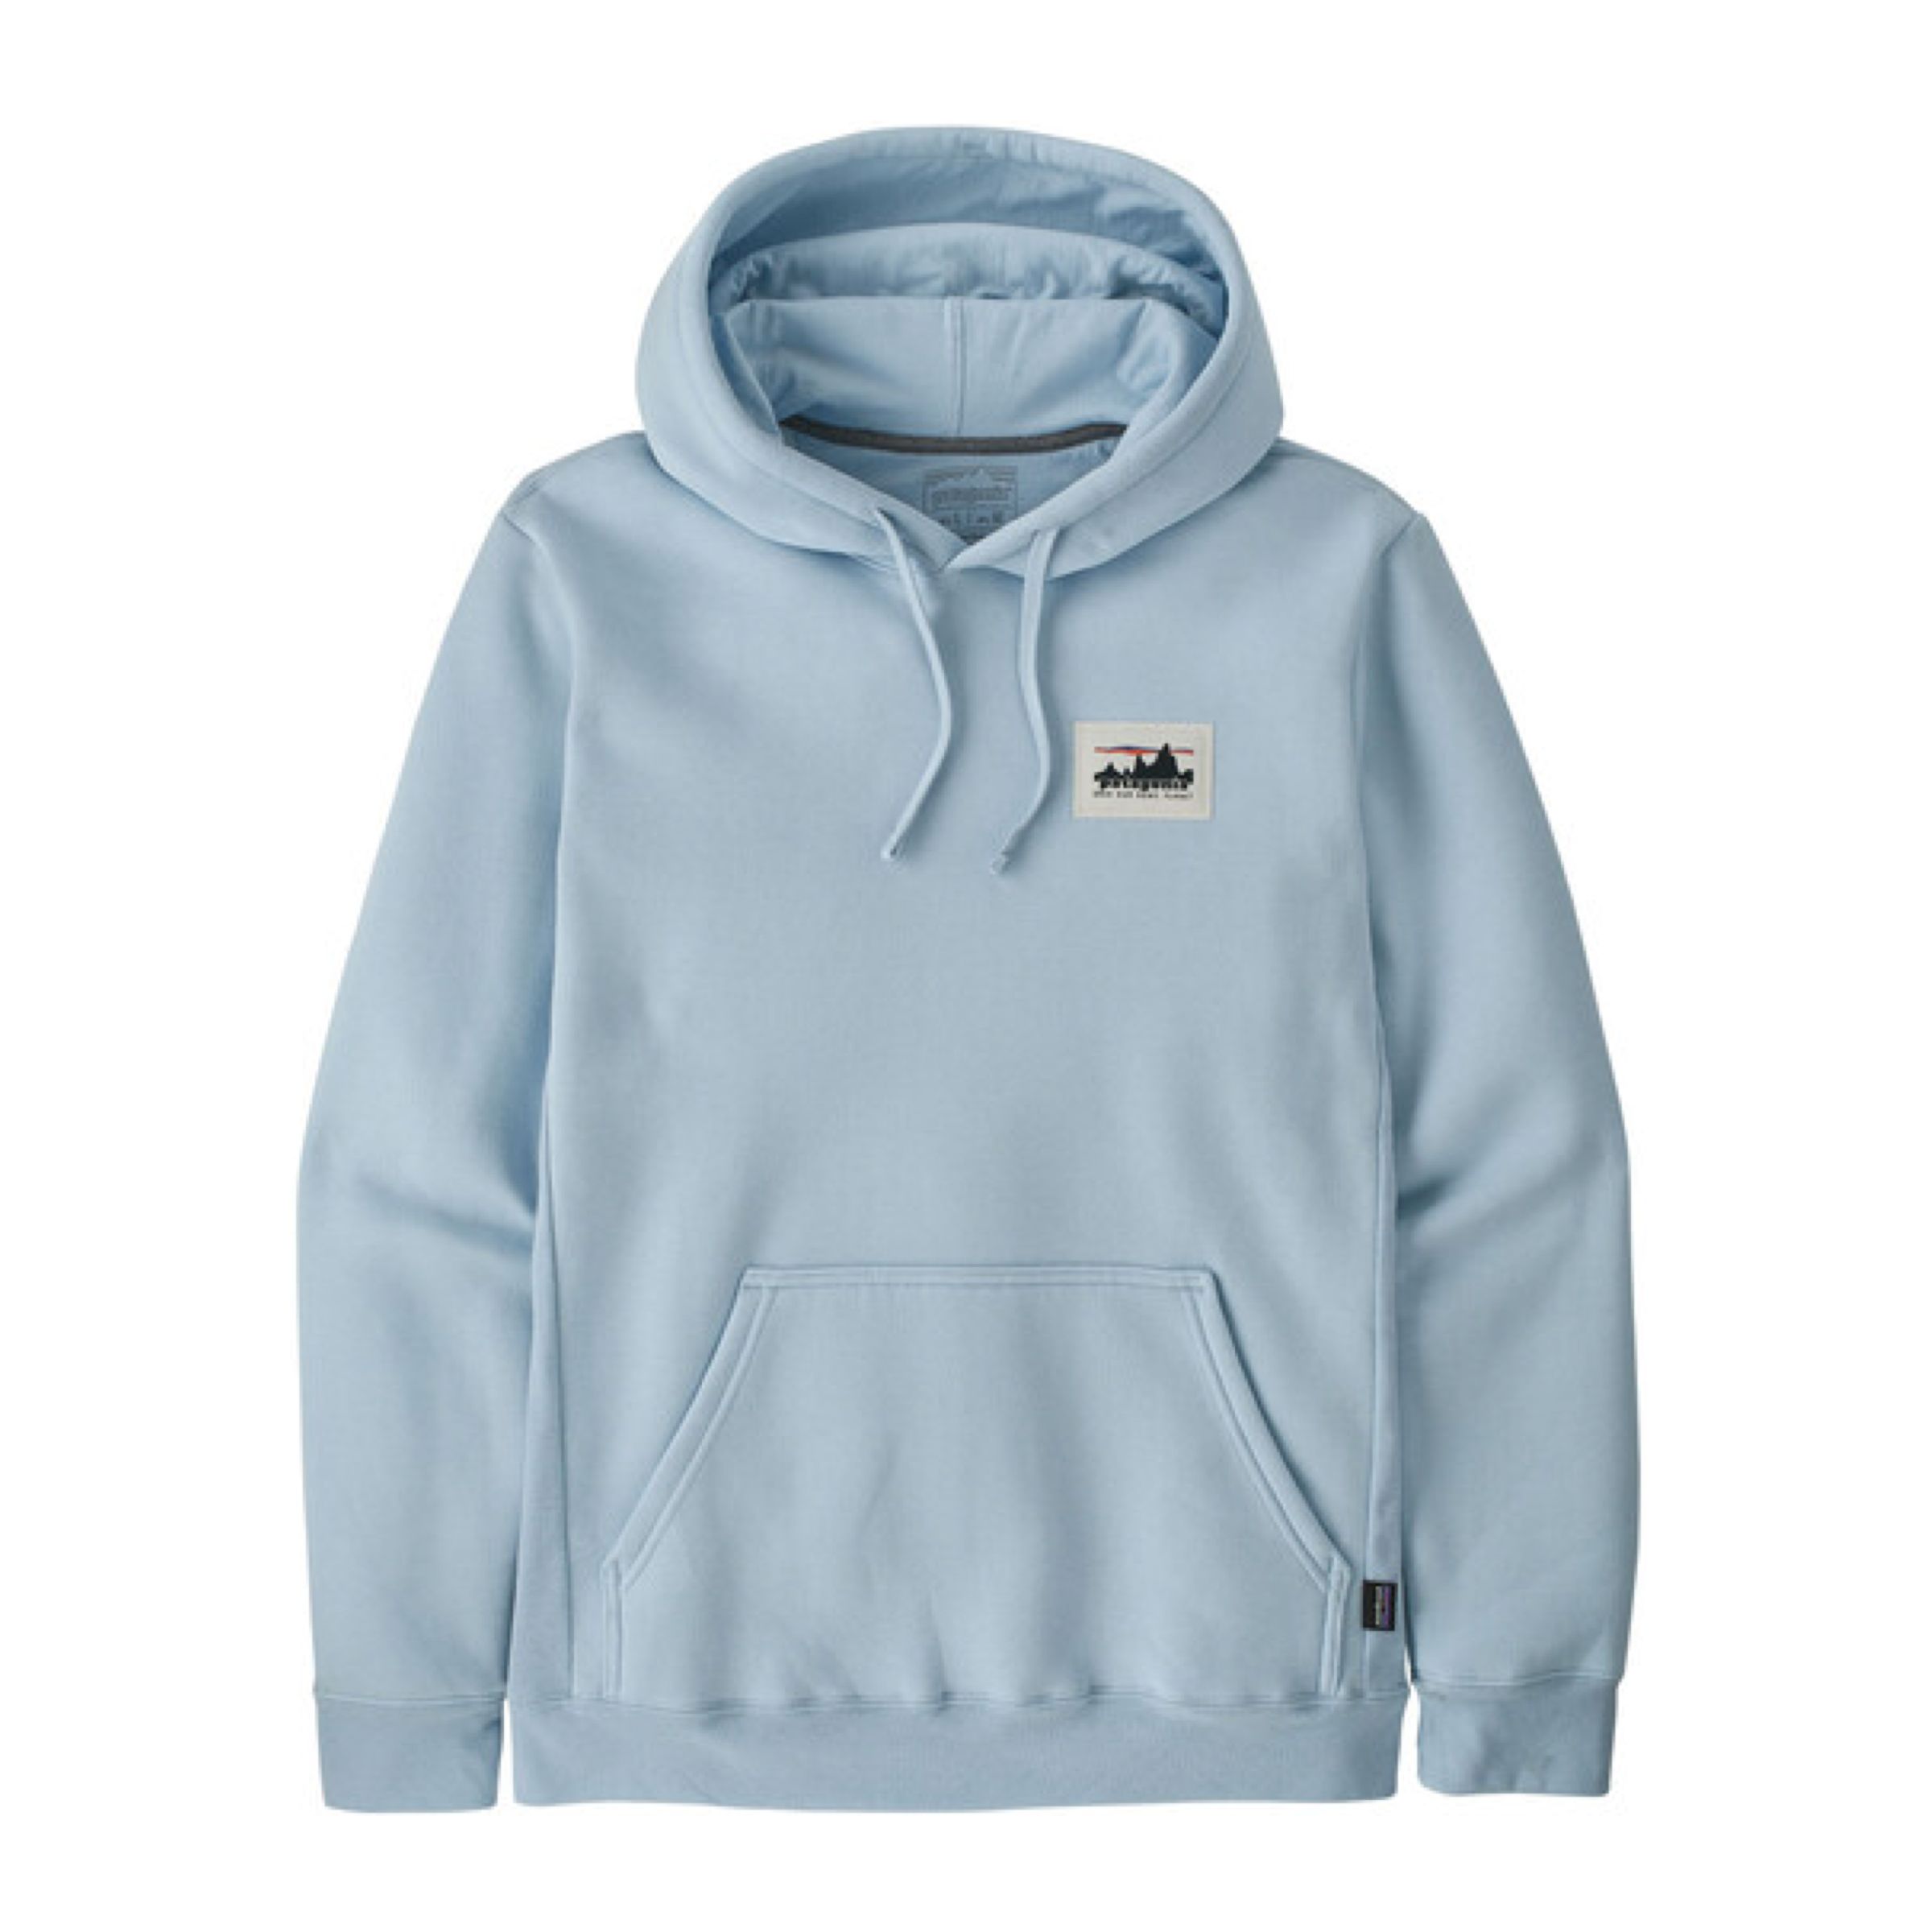 Patagonia Maglia 73 Skyline Uprisal Hoody Chilled Blue